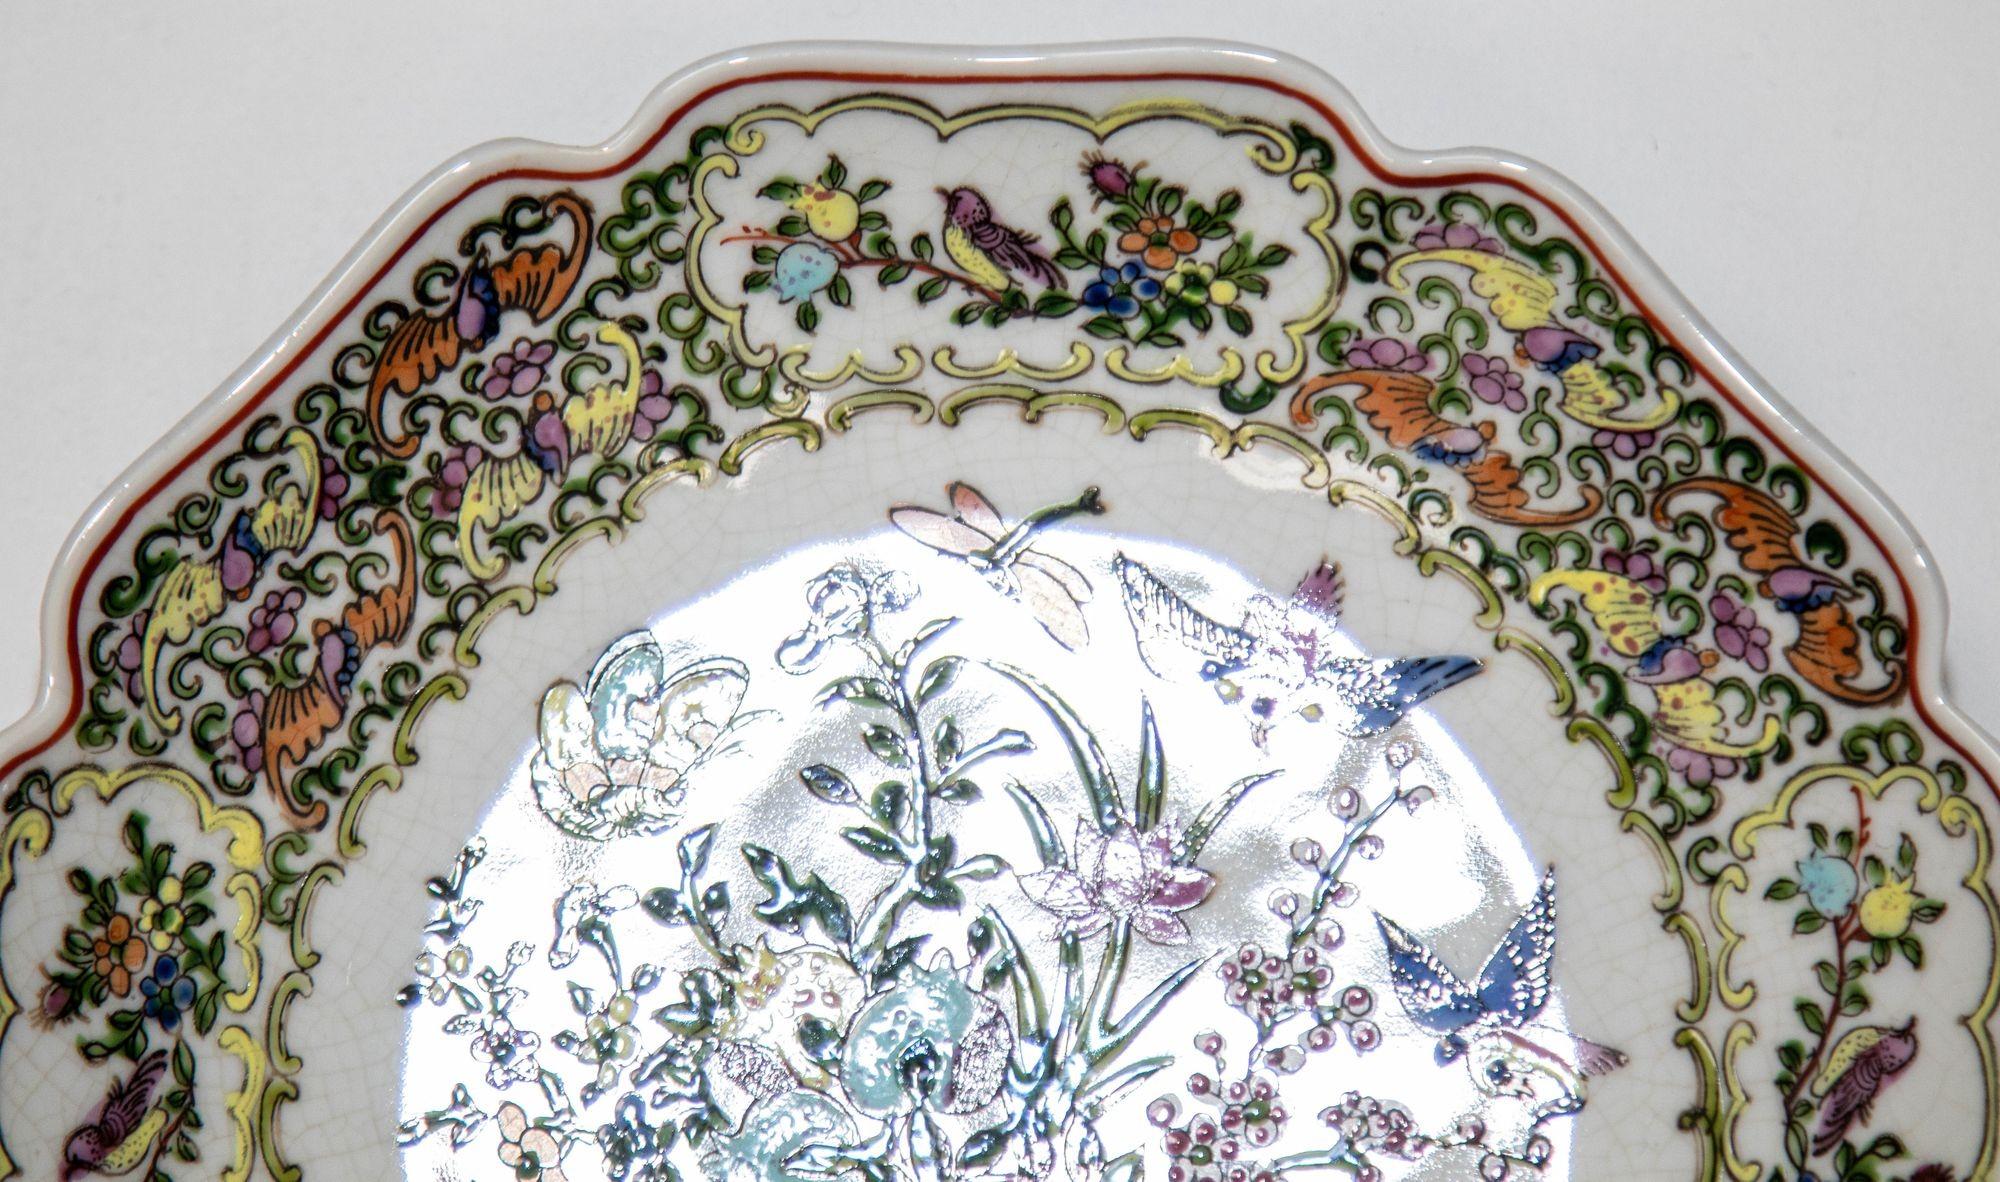 Vintage famille Rose Porcelain plate with birds and flowers hand painted decorations.
Antique famille Rose Medallion Chinese Export Porcelain by Hong horizons.
Features highly detailed multi-hued panels portraying various scenes. Surrounded by a